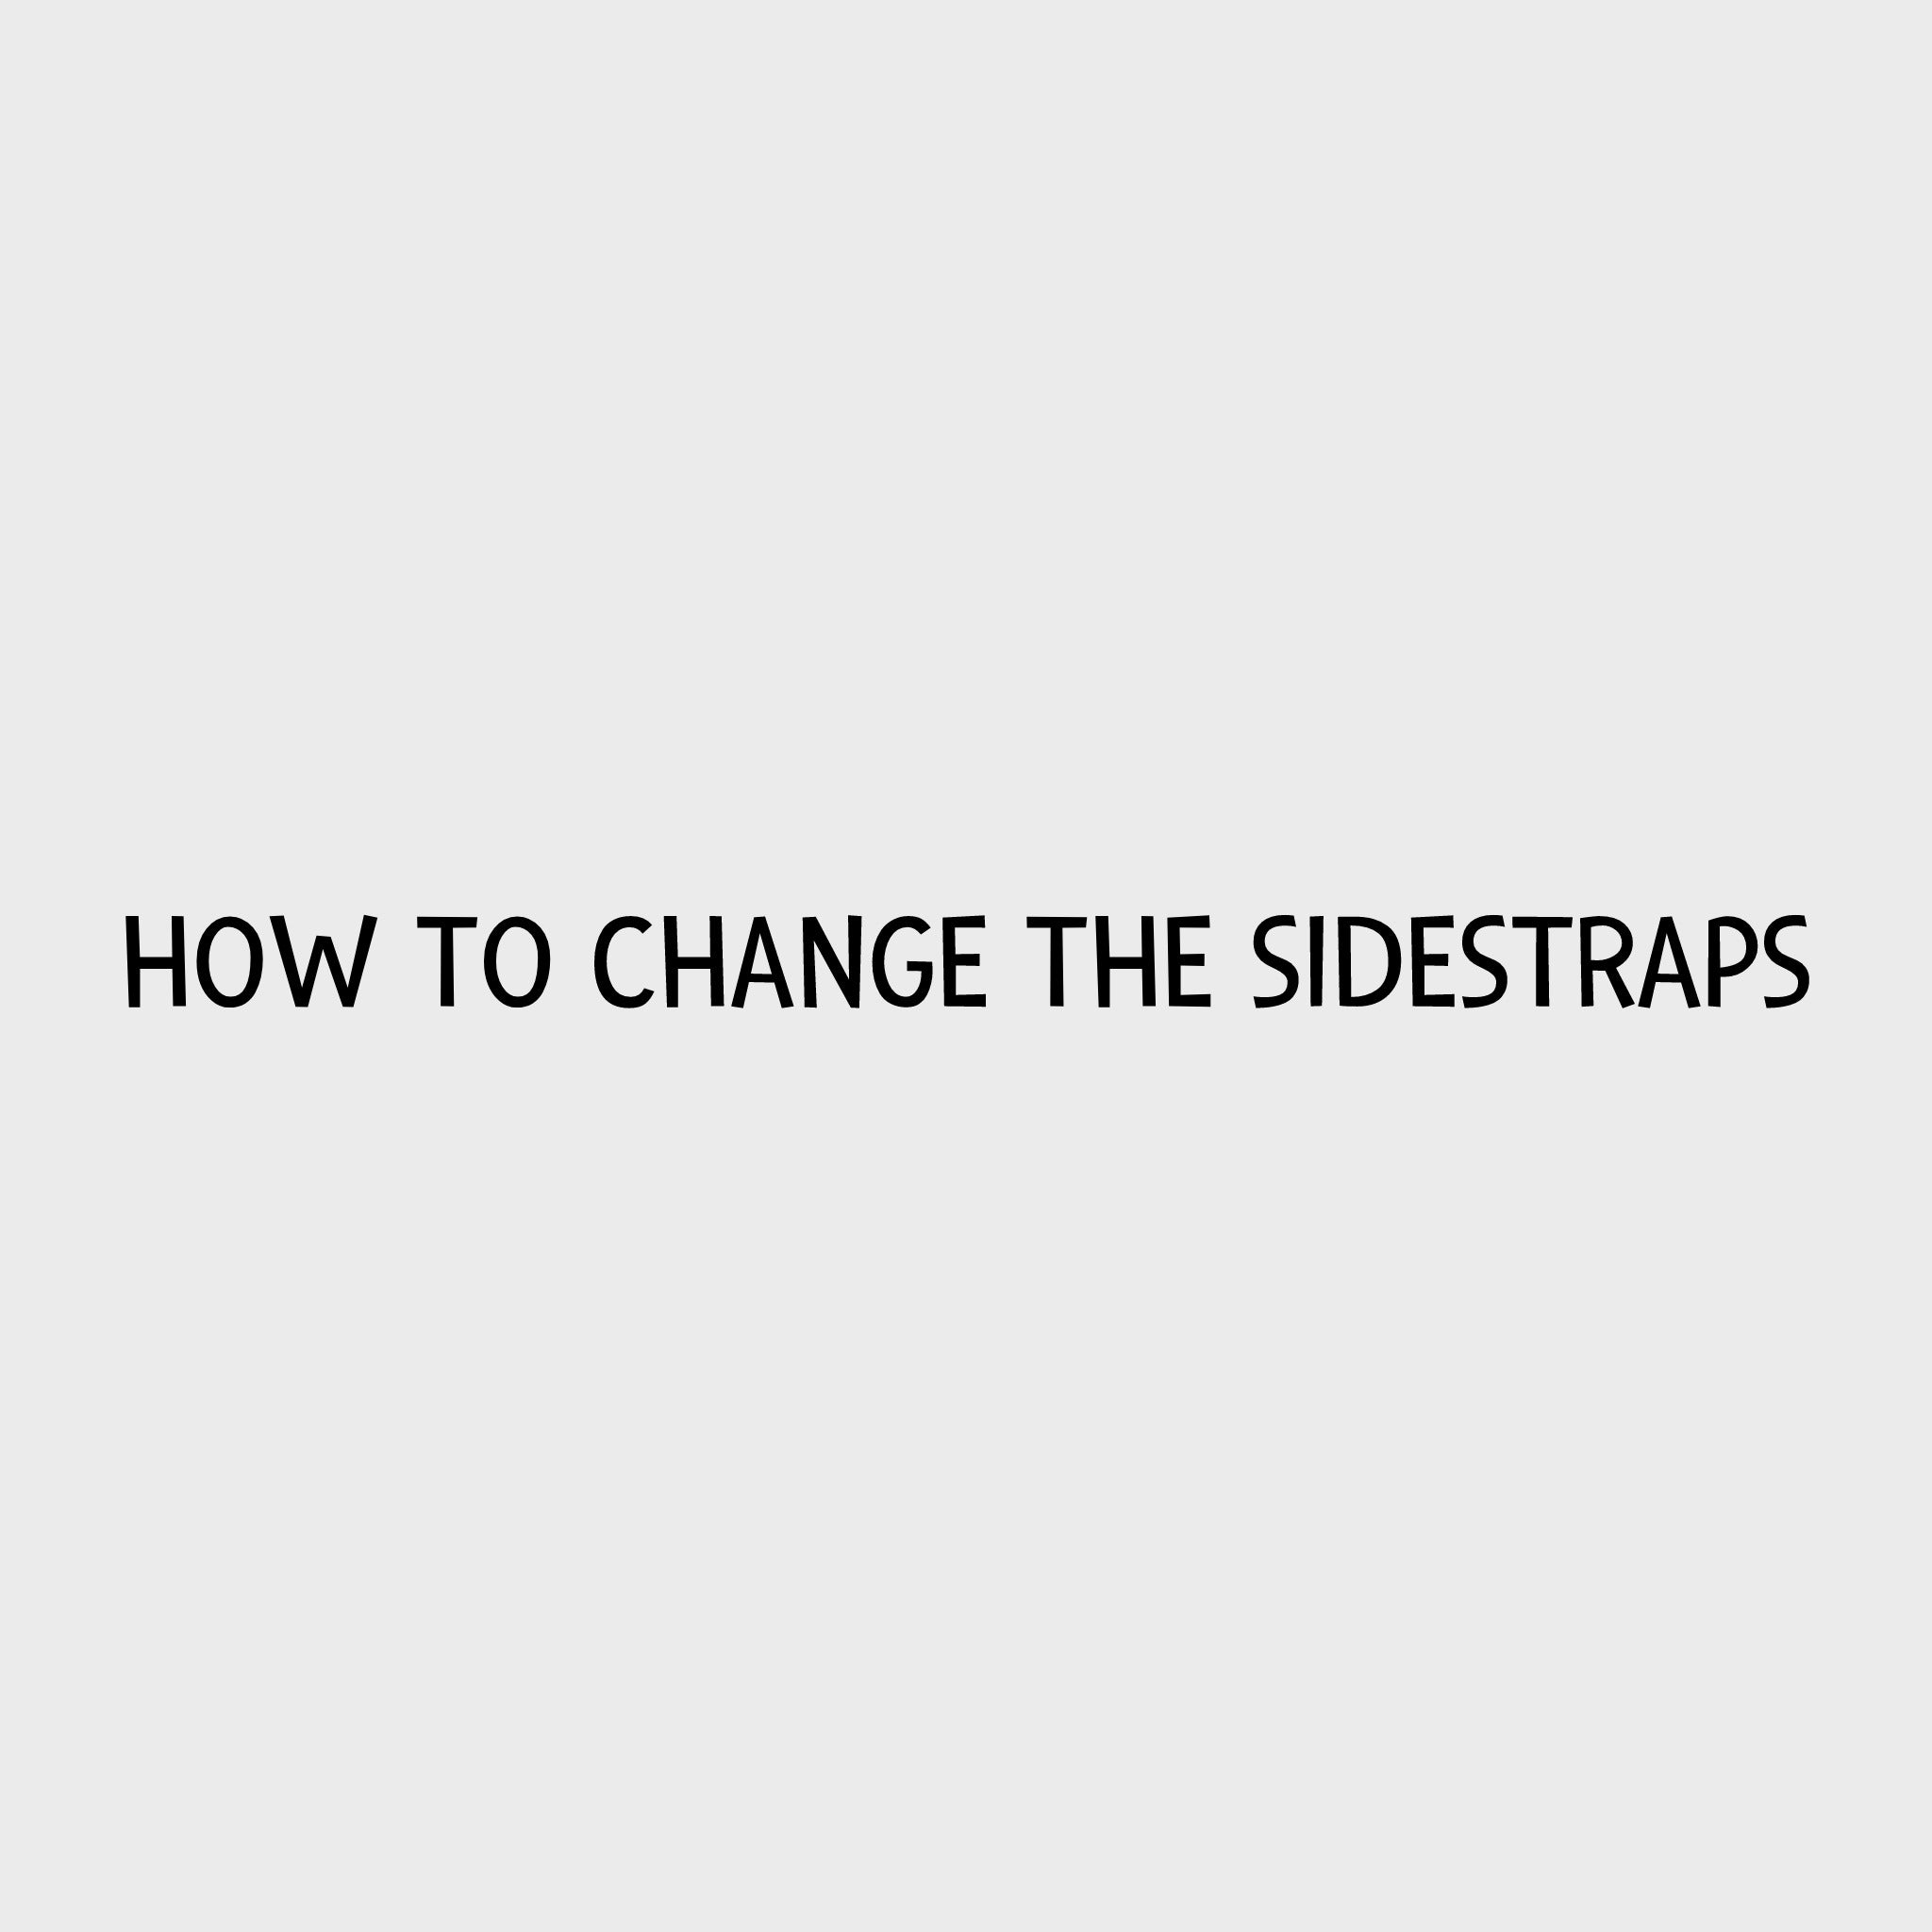 Video - How to change the sidestraps